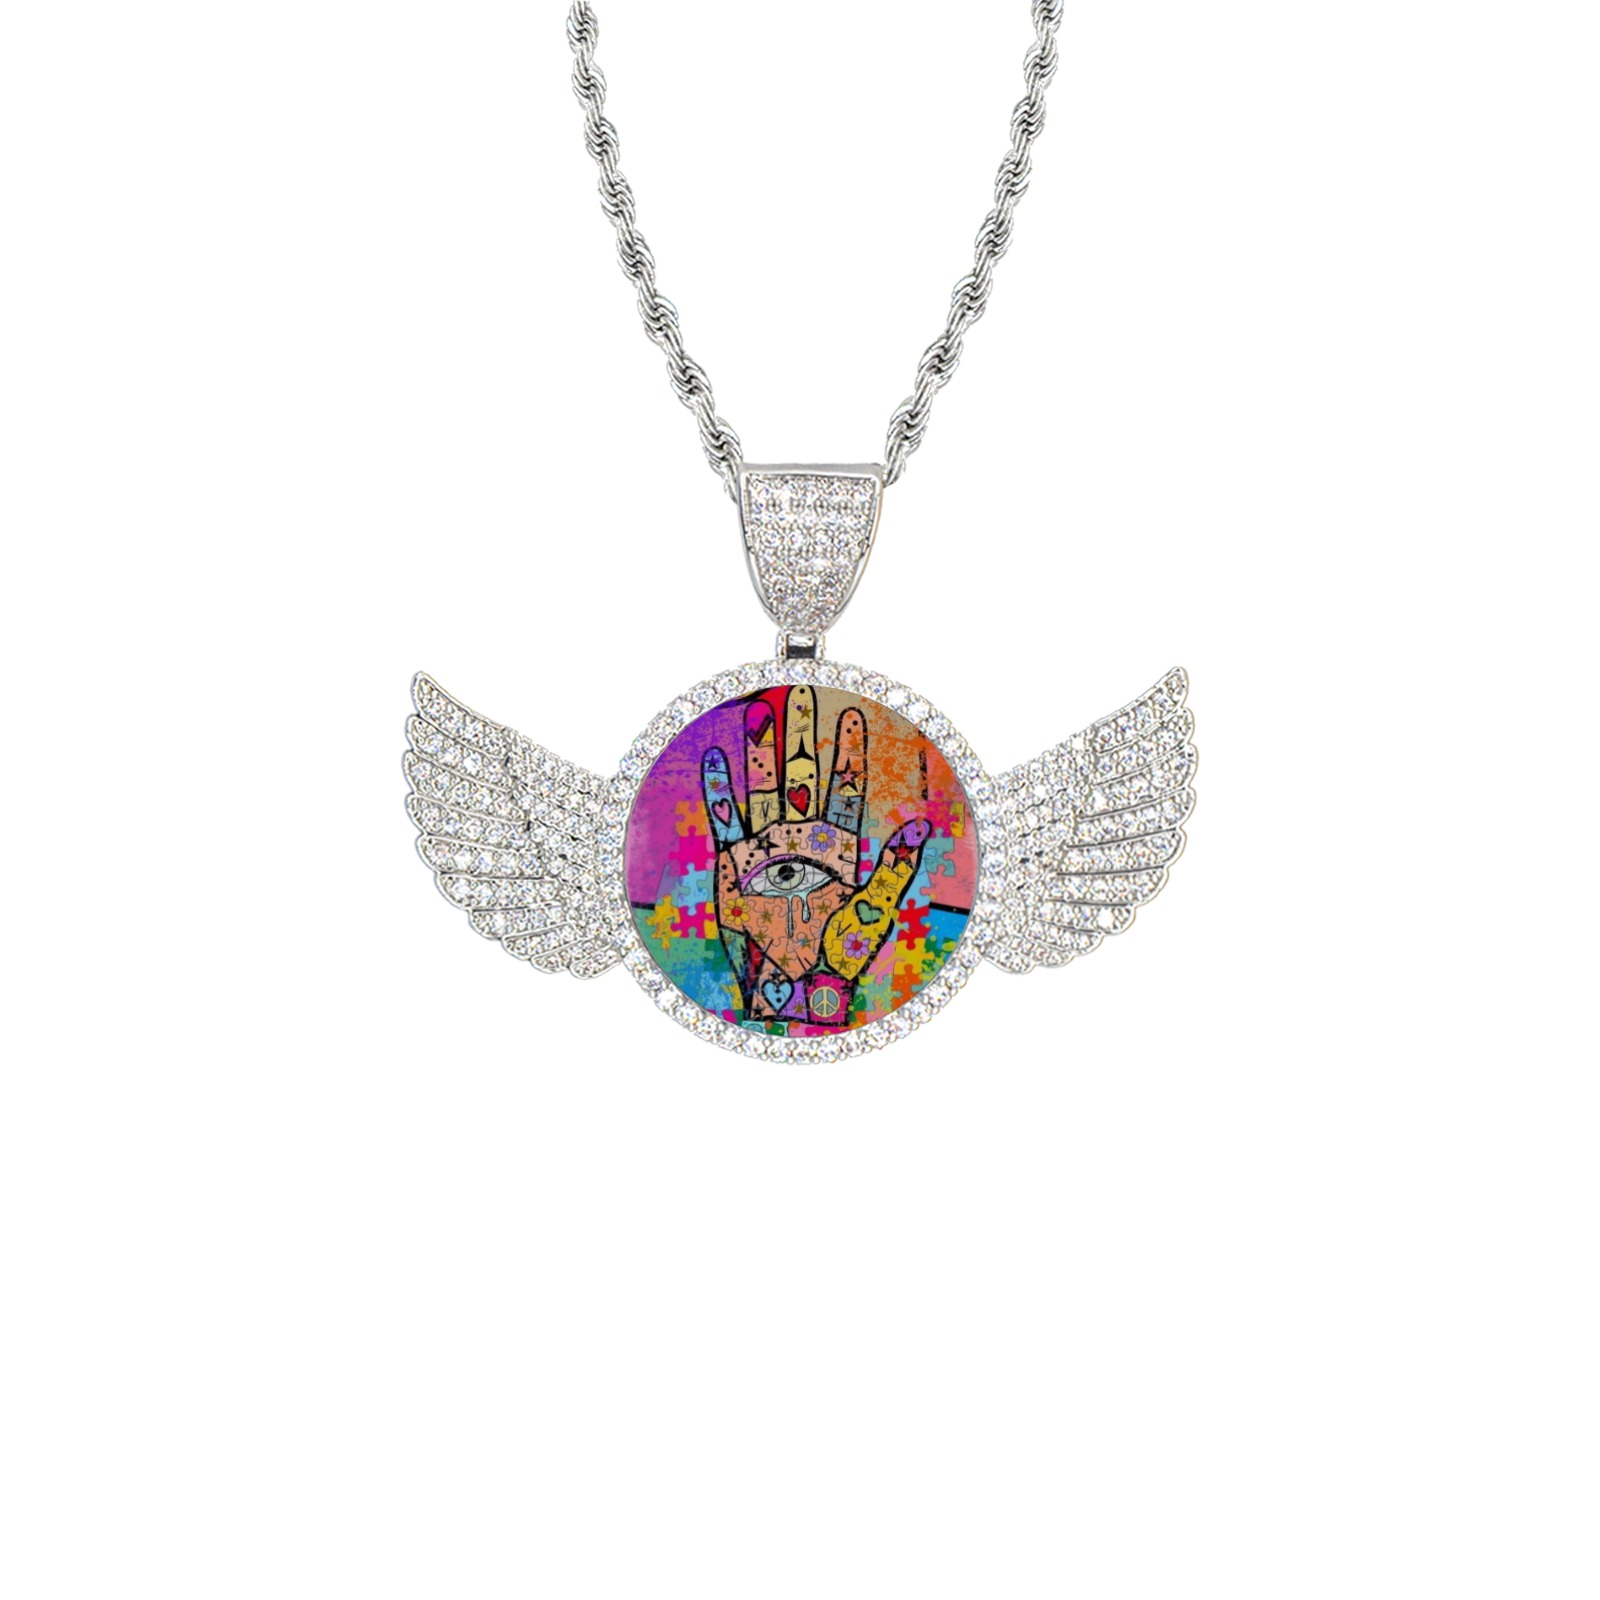 Hands up by Nico Bielow Wings Silver Photo Pendant with Rope Chain